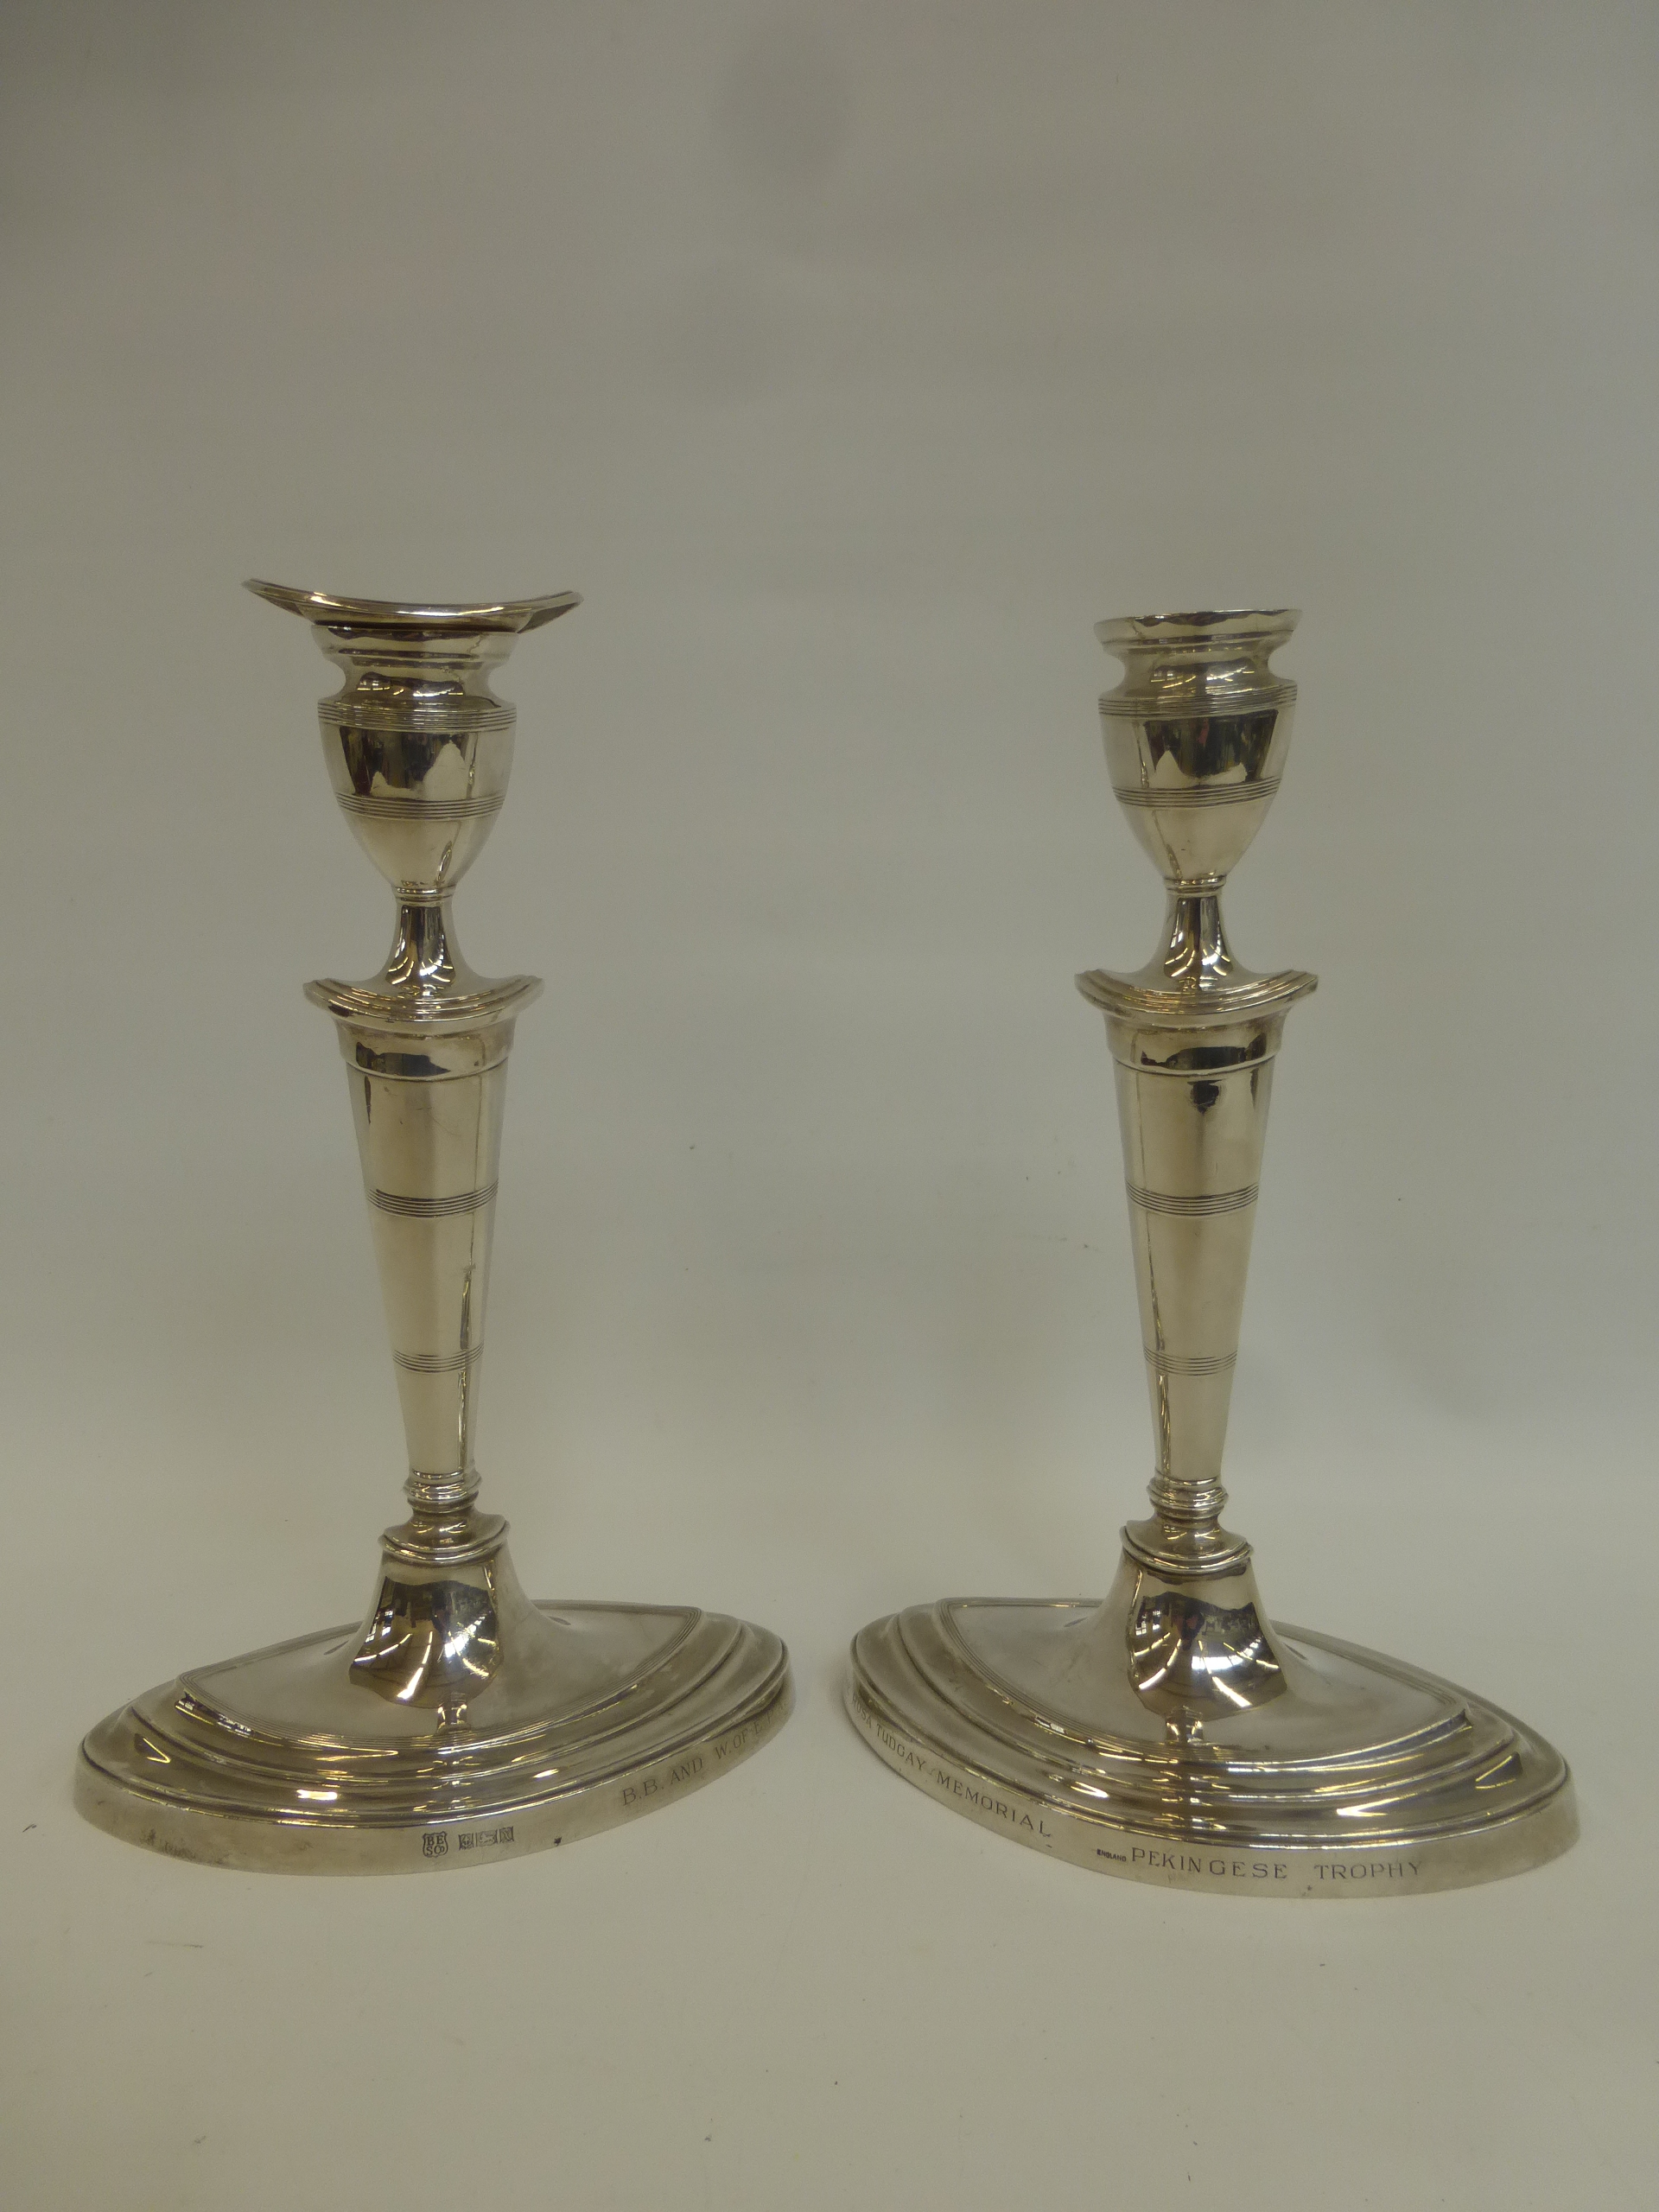 A pair of Regency style silver candlesticks with inscription B.B and W. of E.P.A. "The Rosa Tudgay